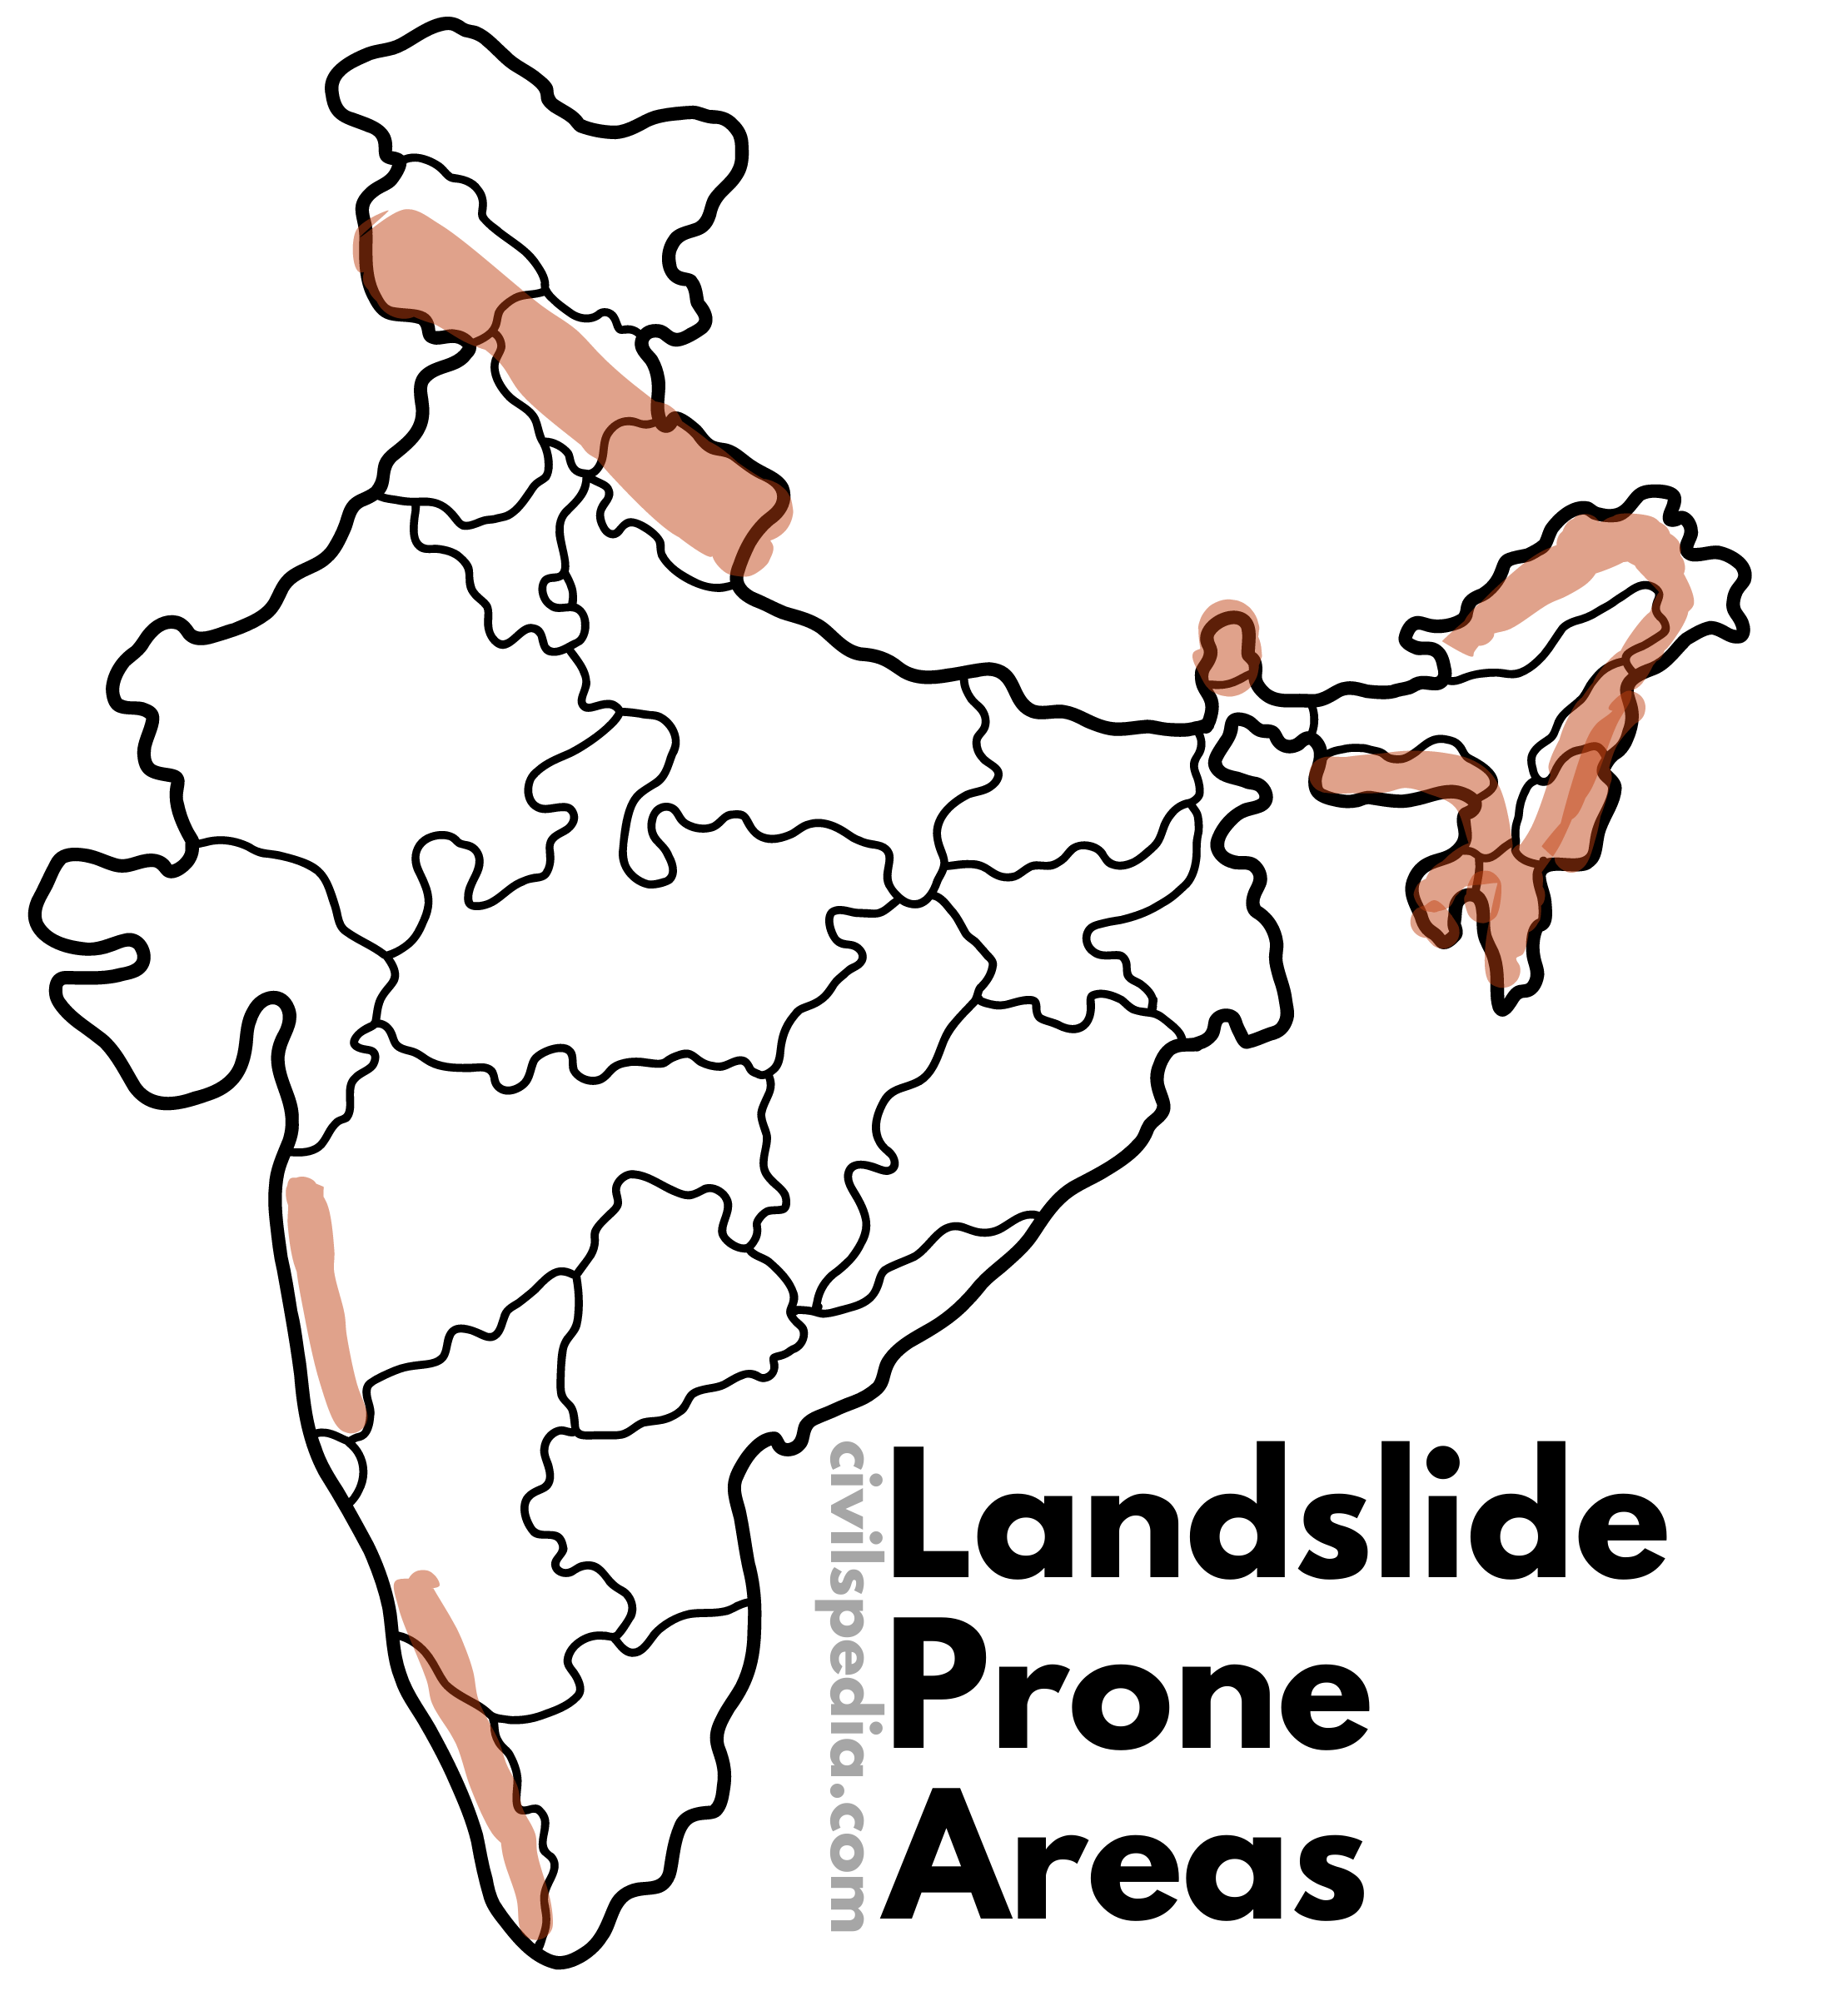 Landslide Prone Areas in India